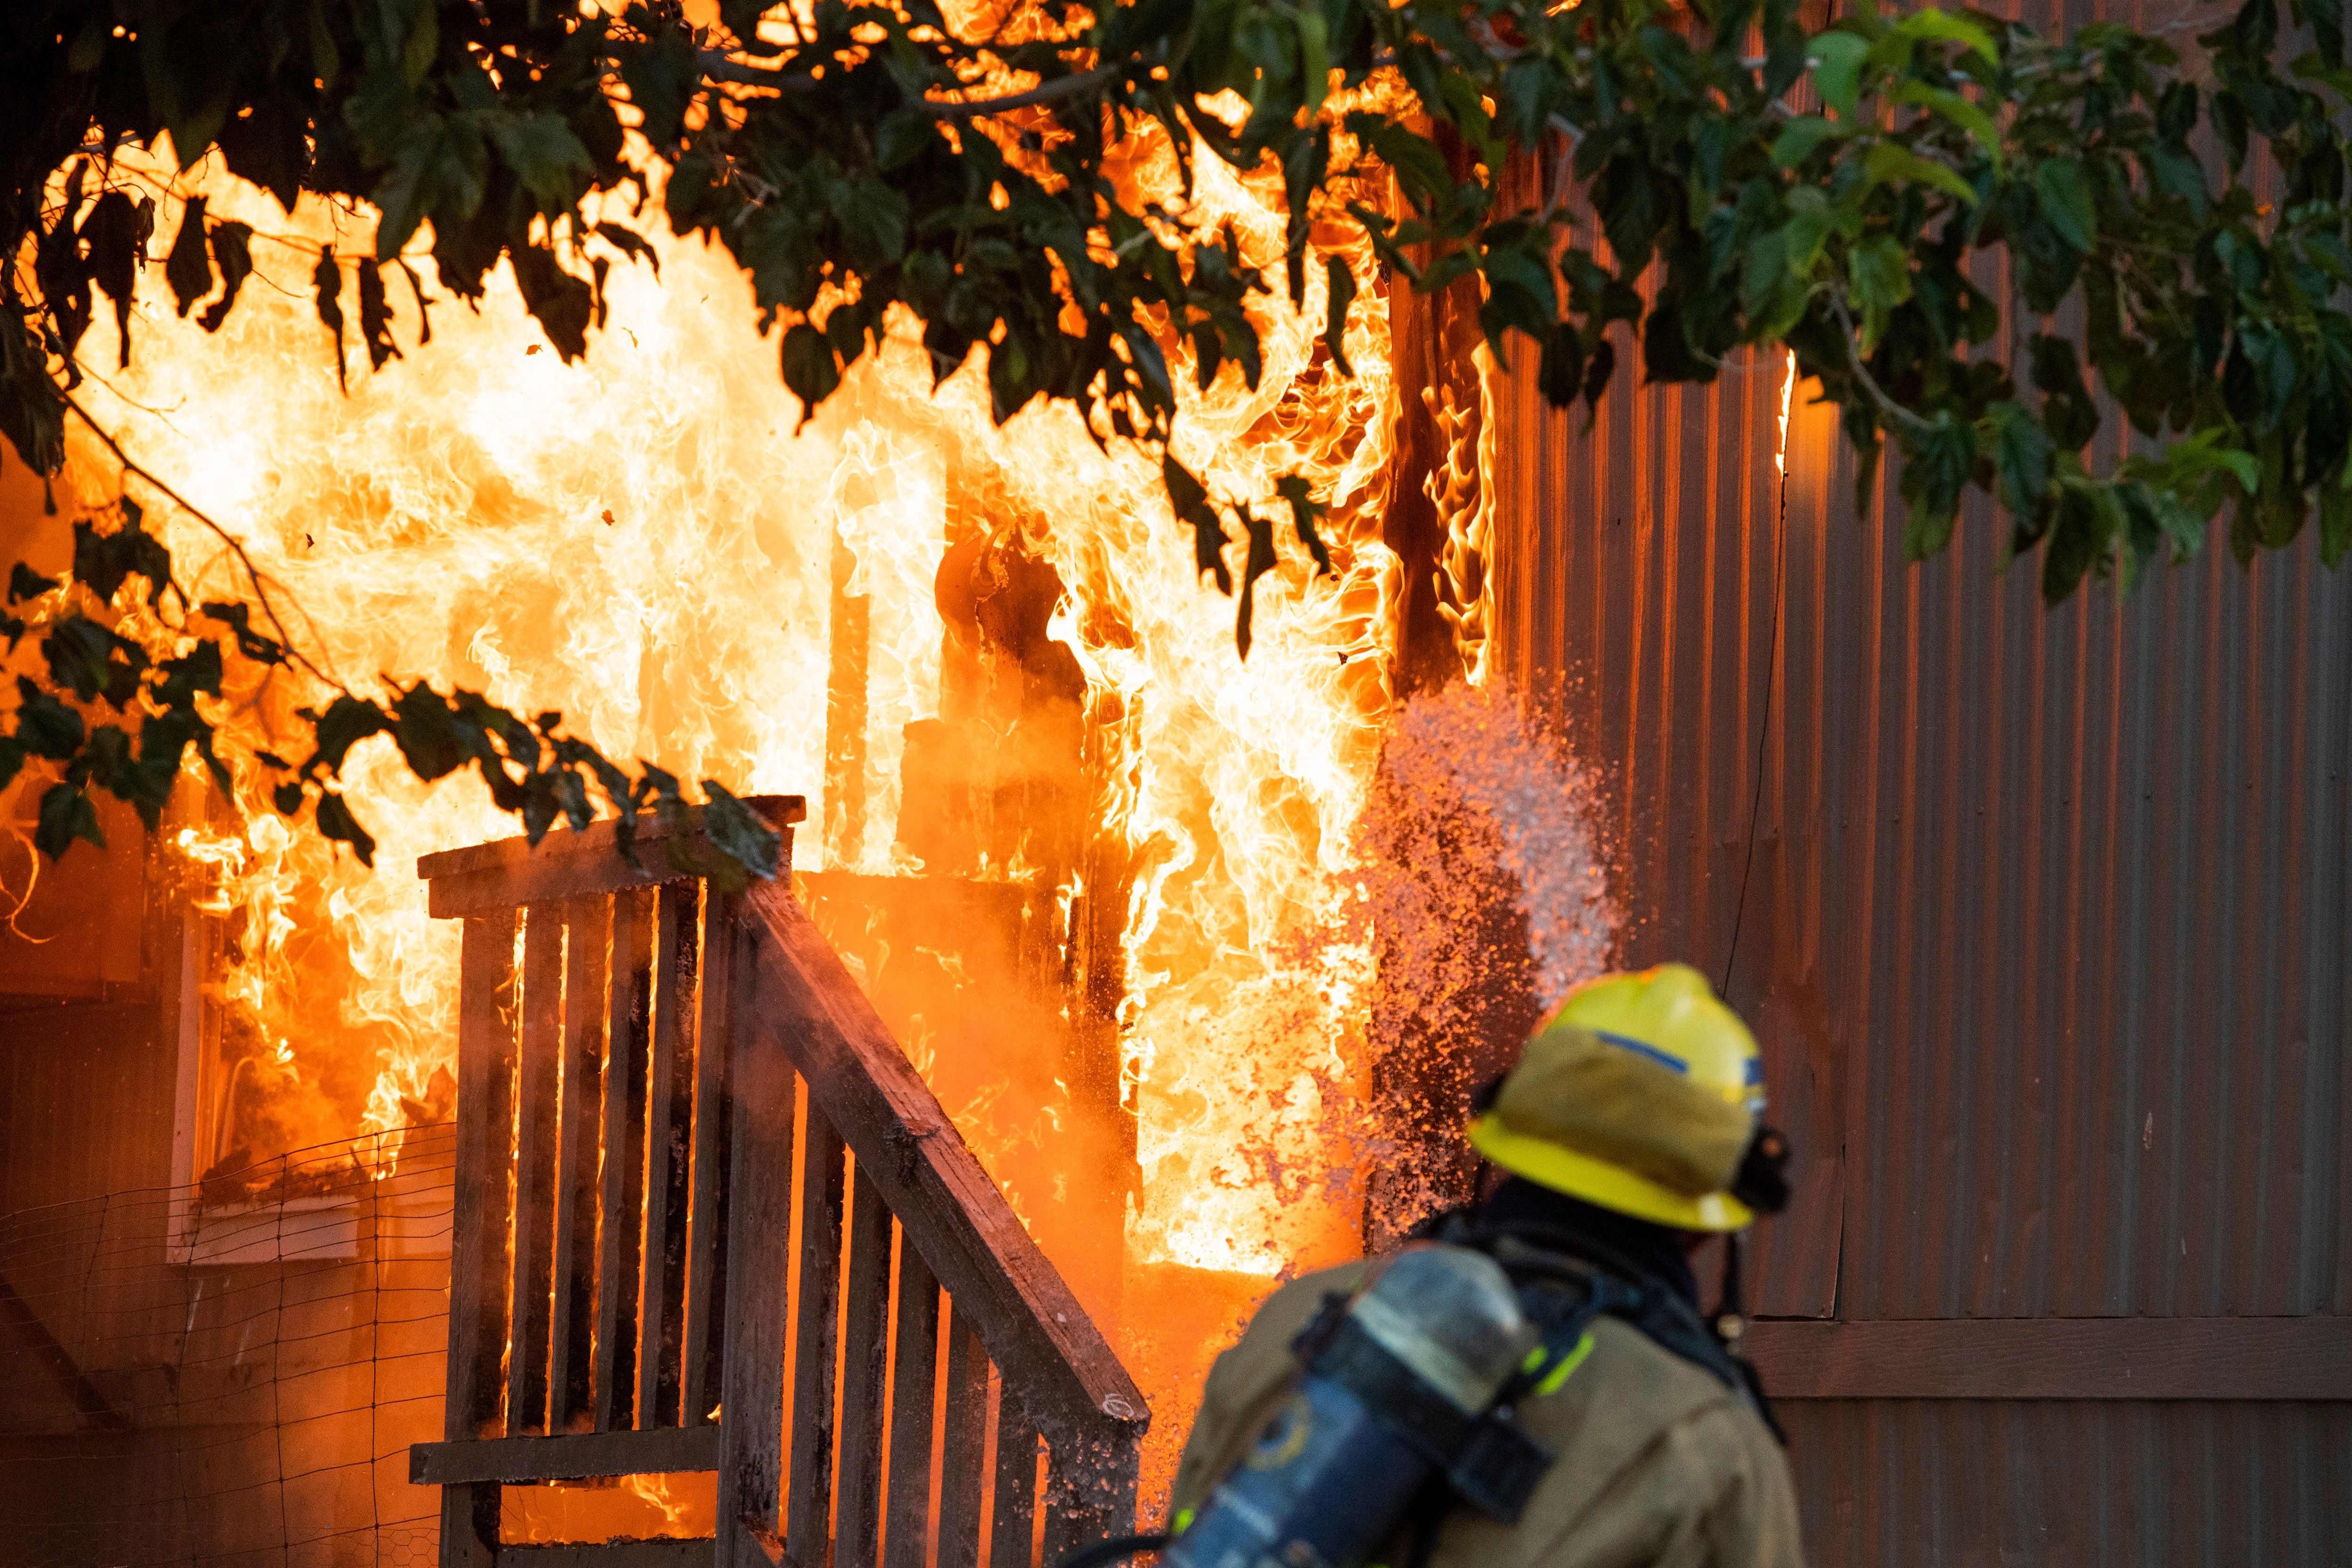 This image shows the back of a fireman's helmet as he stands in front of a burning porch.